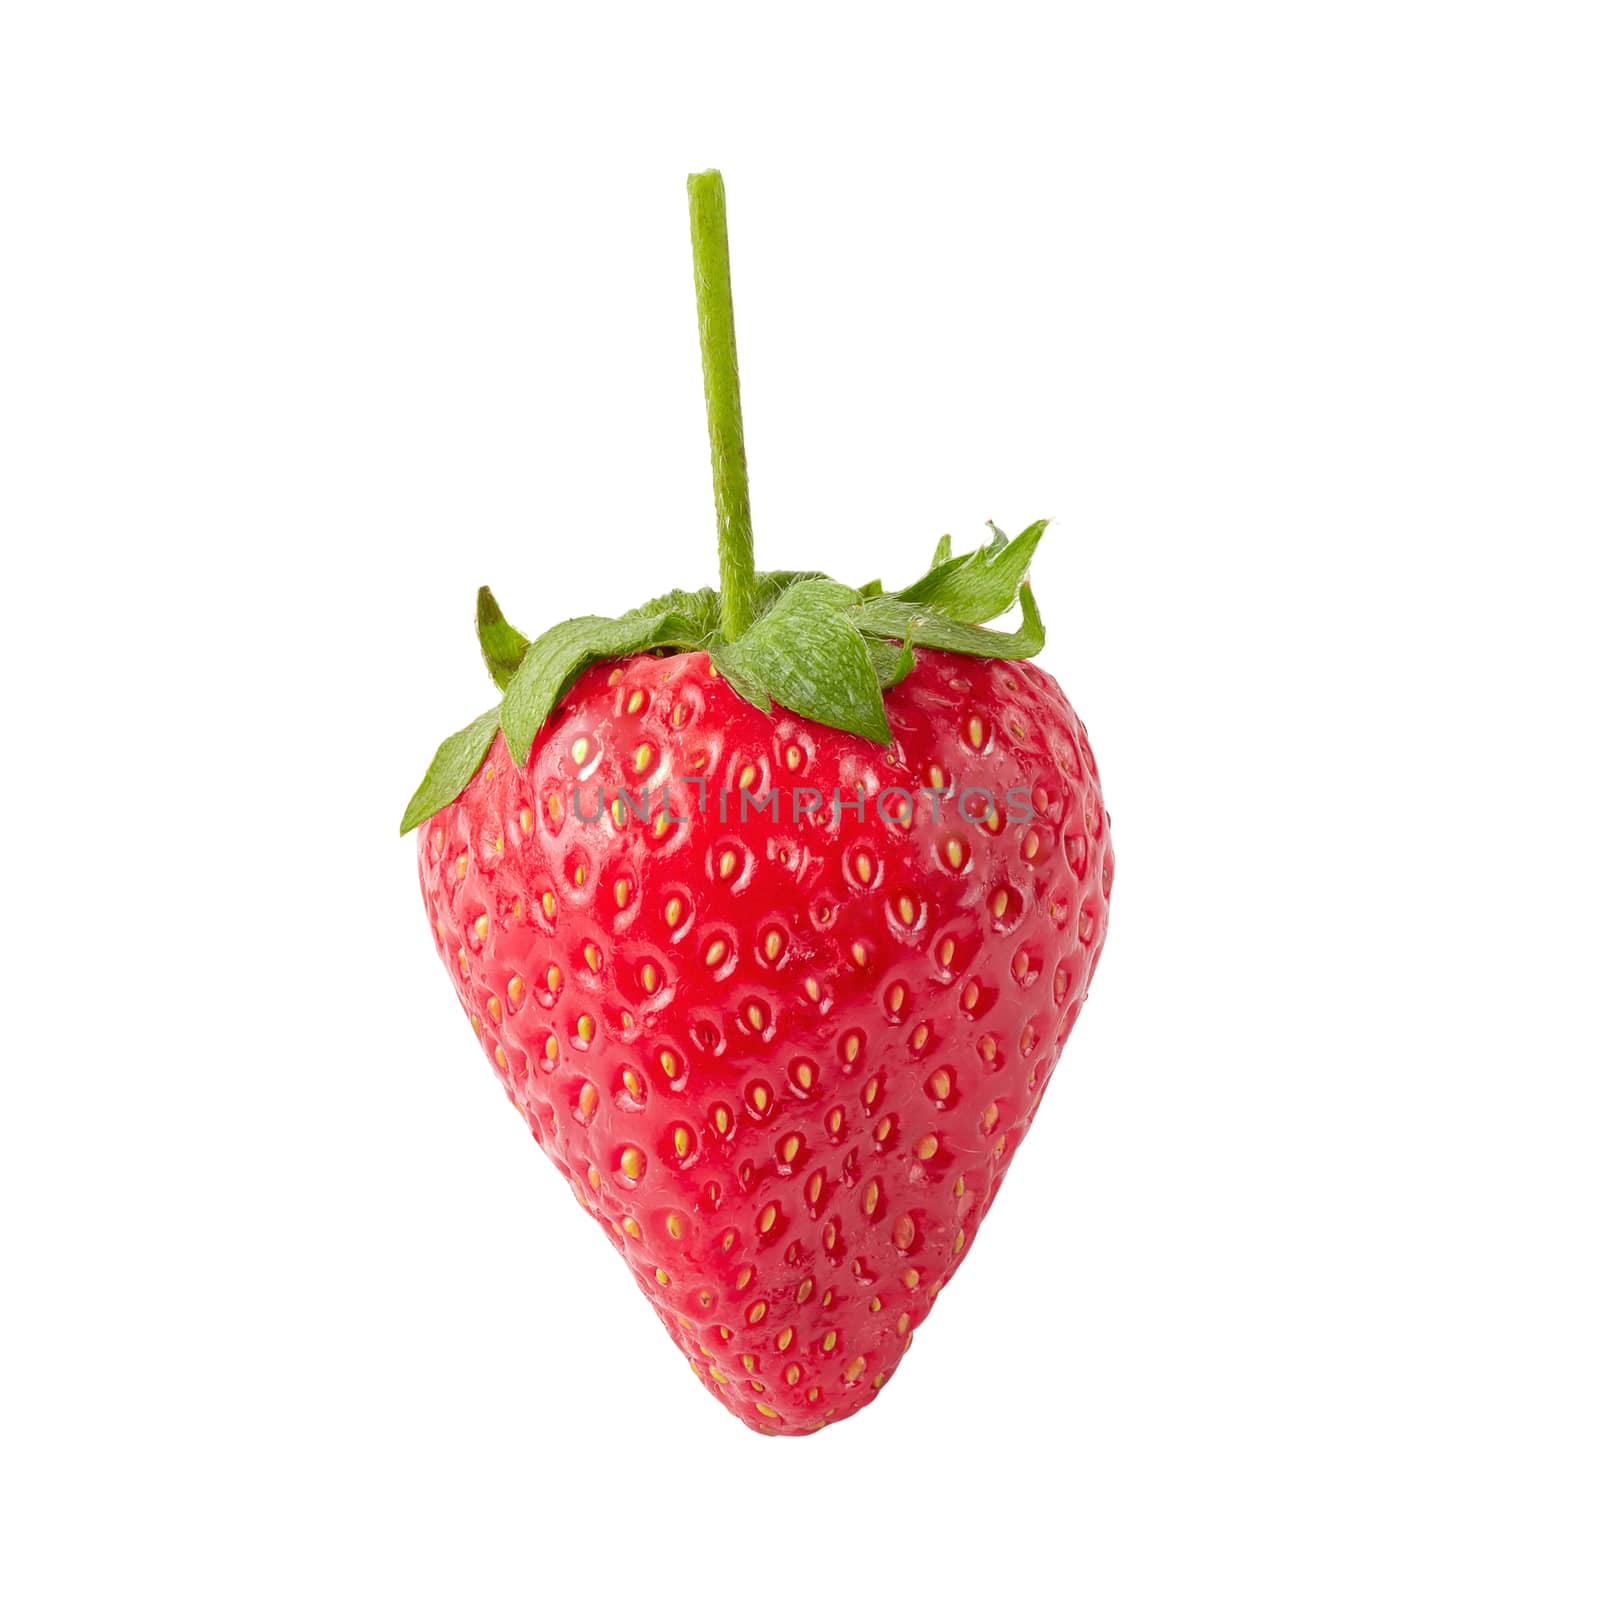 Fresh strawberries isolated on a white background